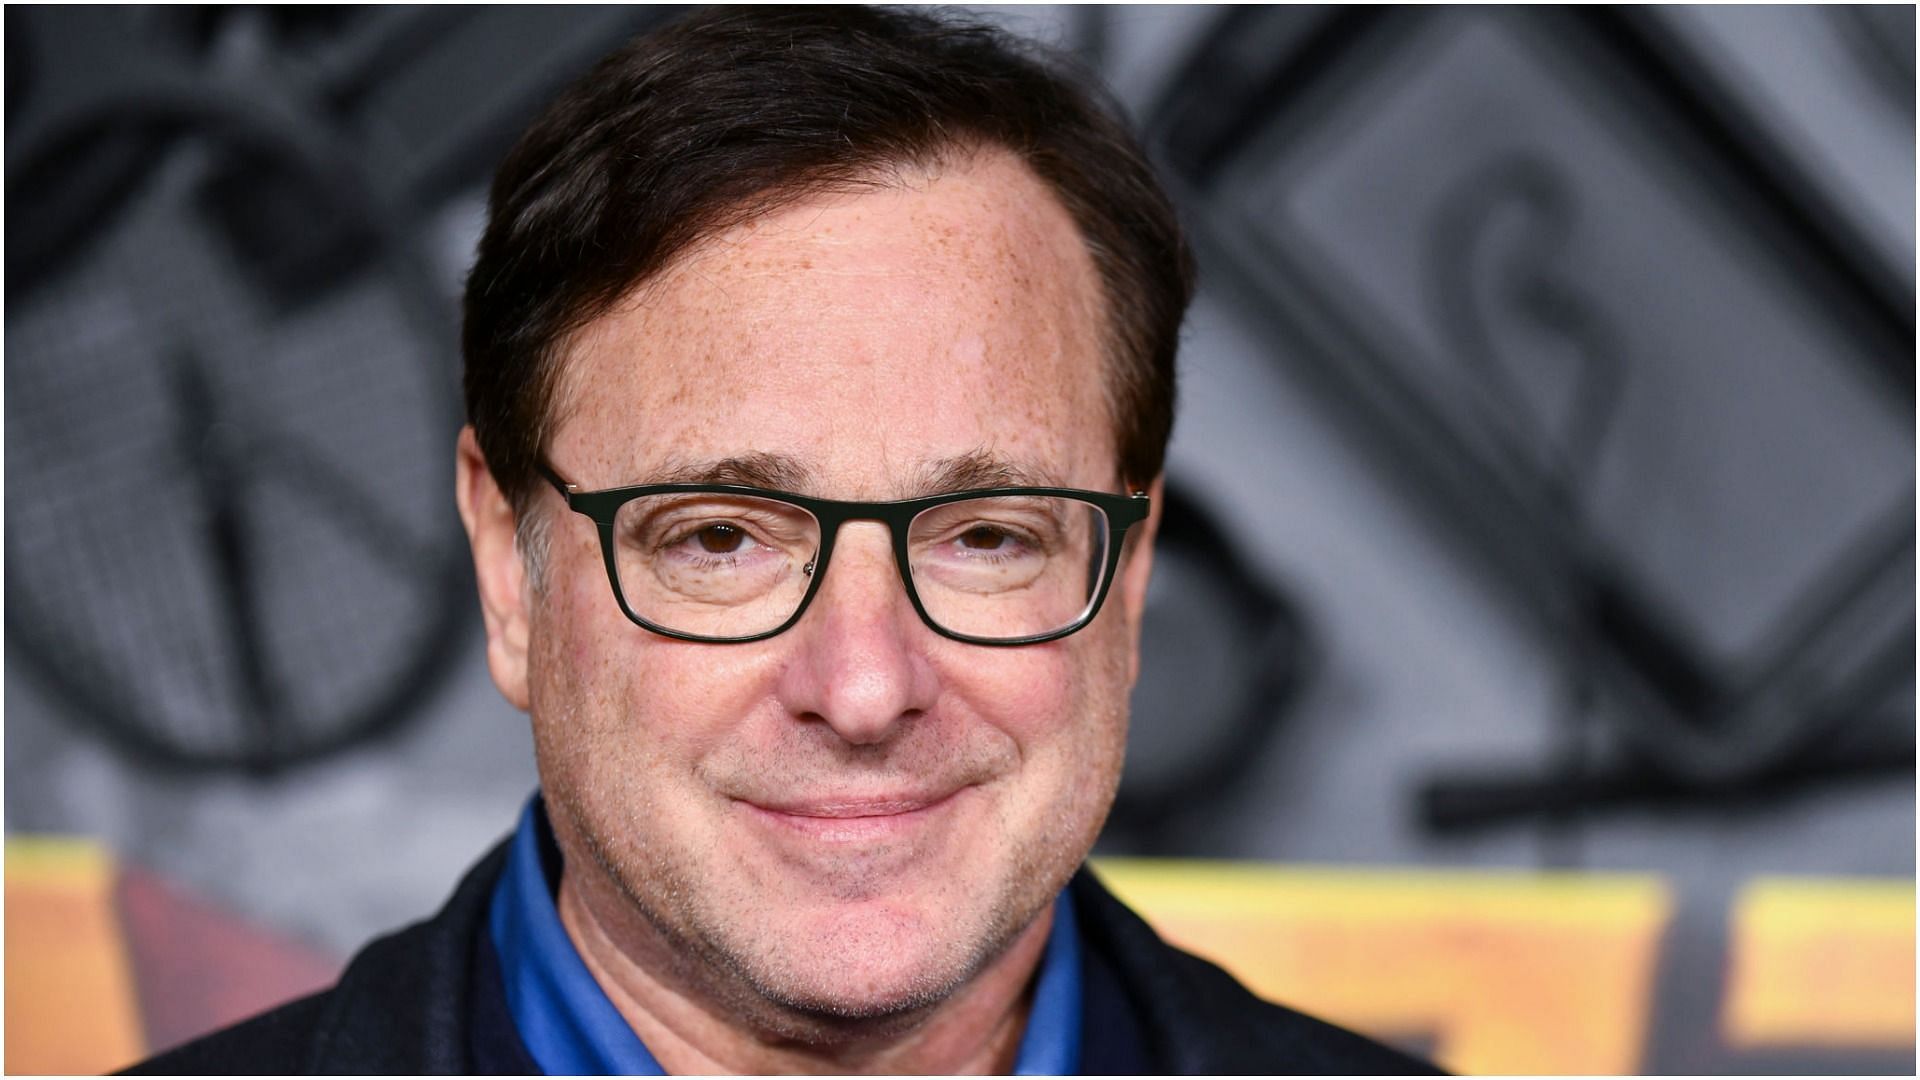 Bob Saget was announced dead at the scene where he was found (Image via Rodin Eckenroth/Getty Images)